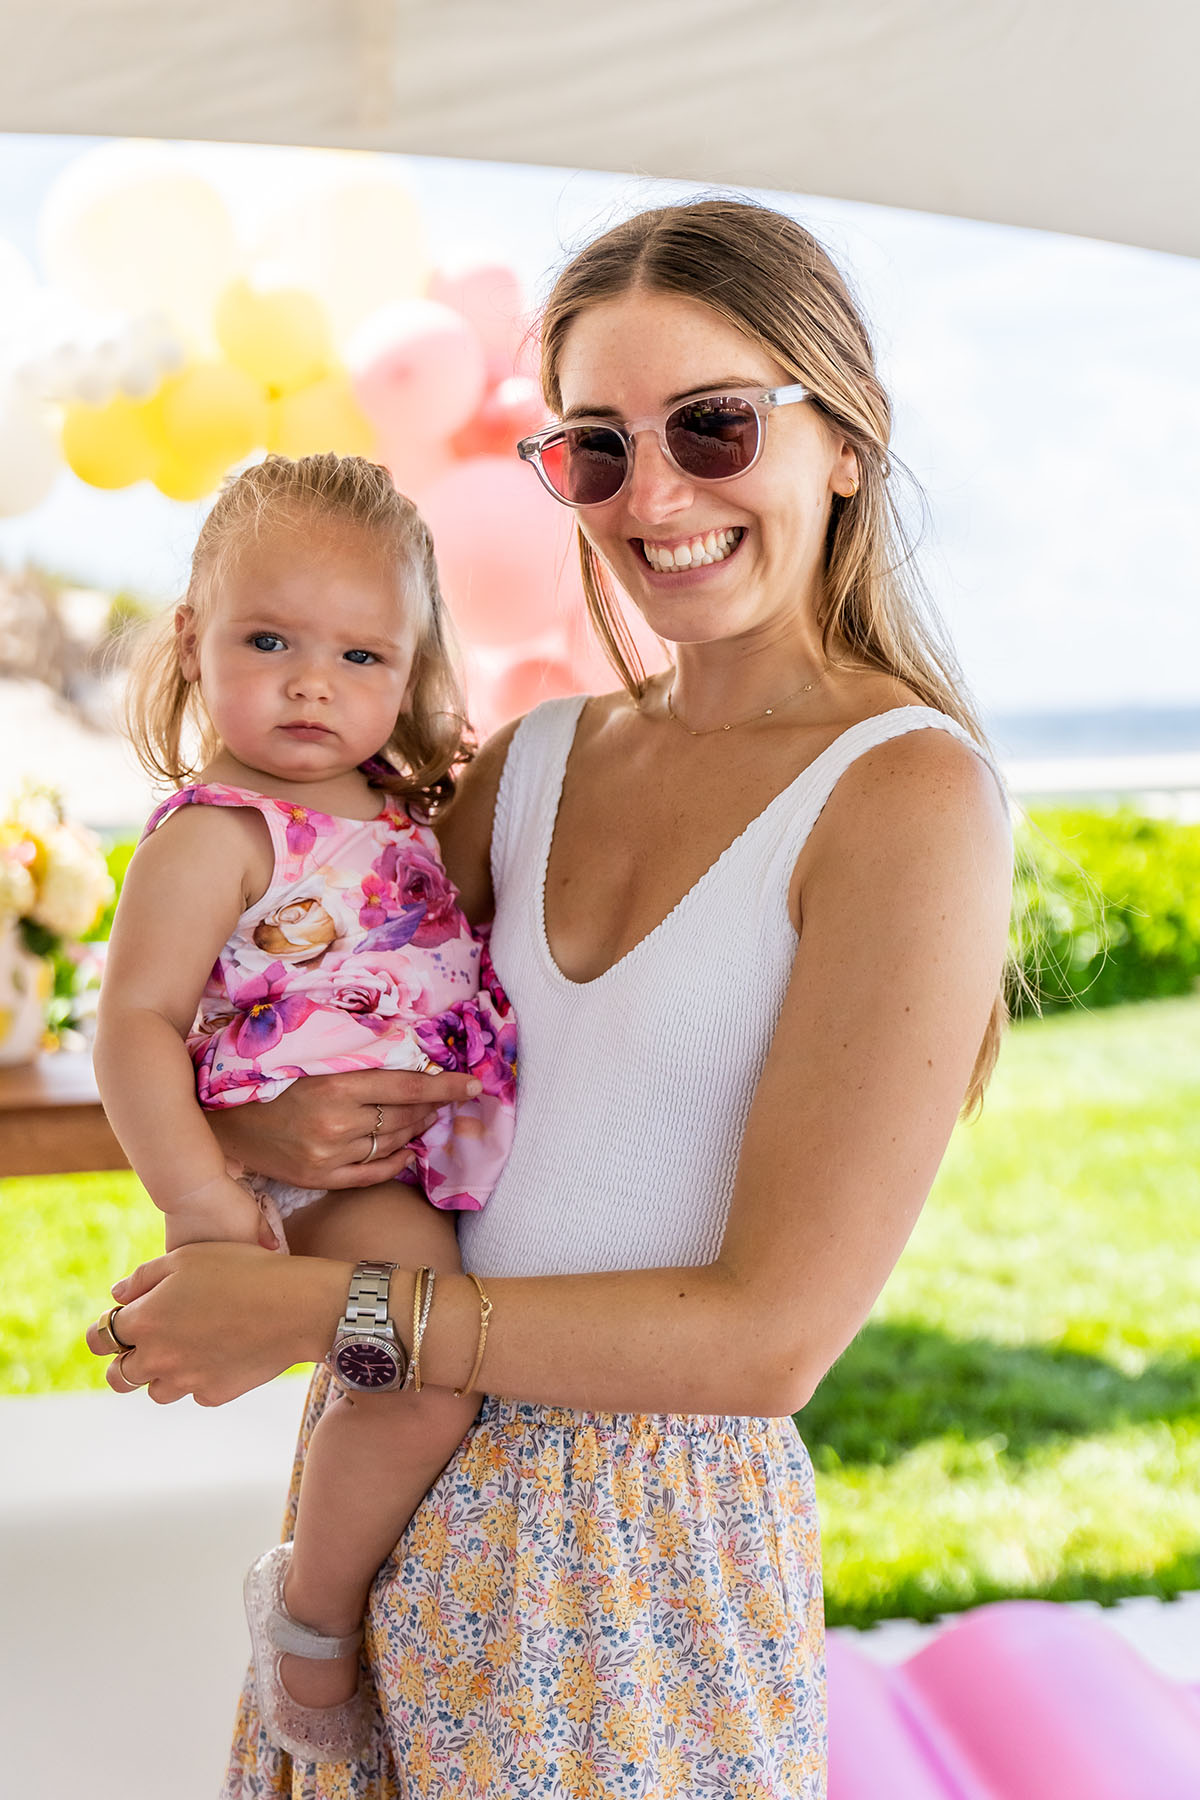 mom with sunglasses is holding a toddler in pink flower dress